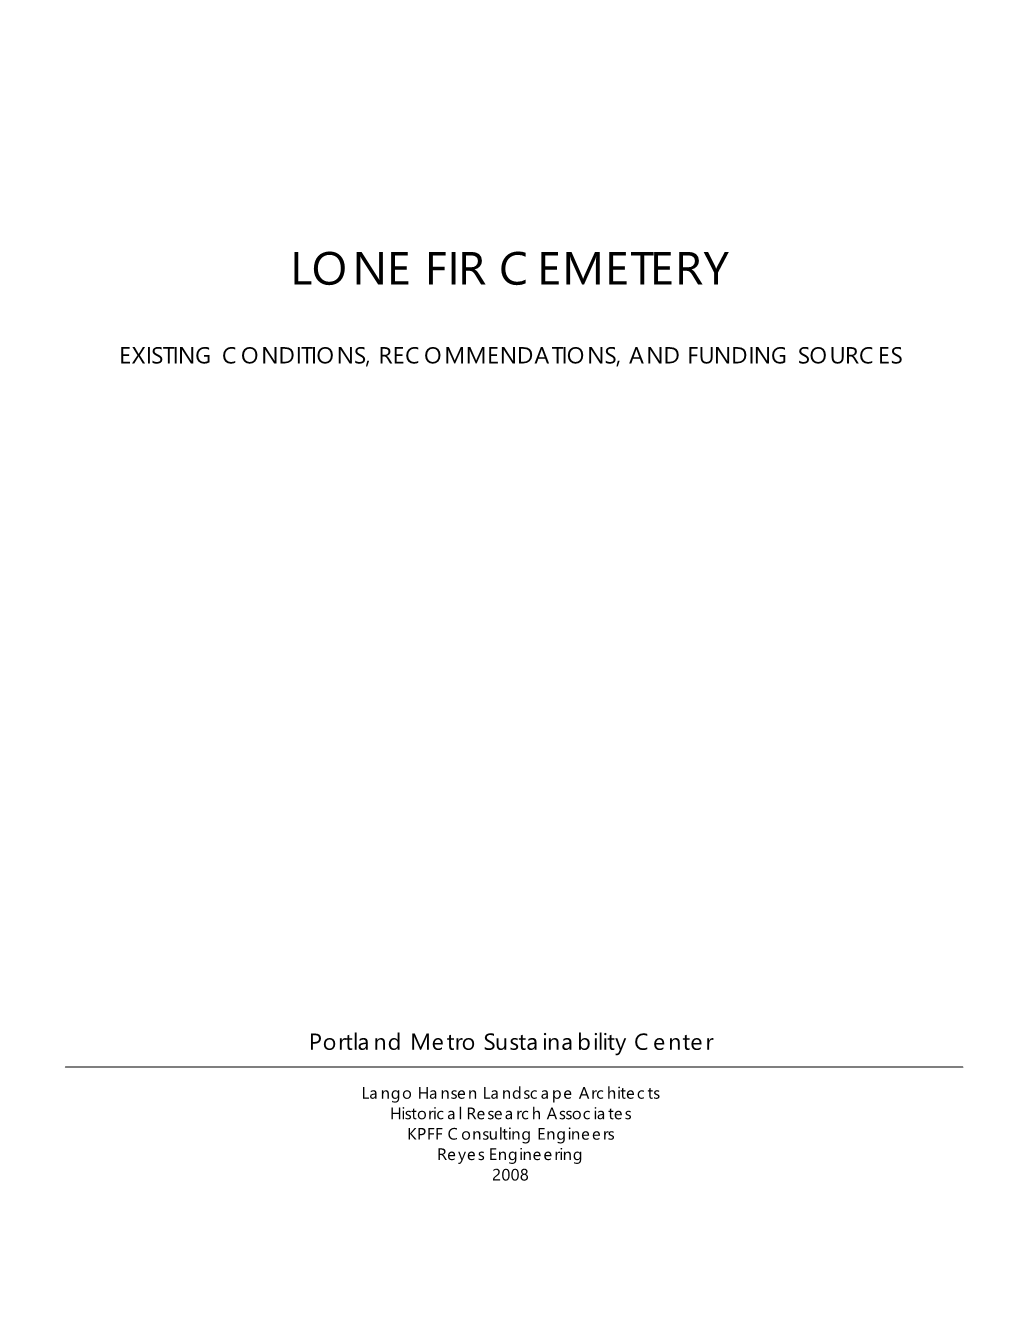 Lone Fir Cemetery Recommendations Mar 2010 PDF Open